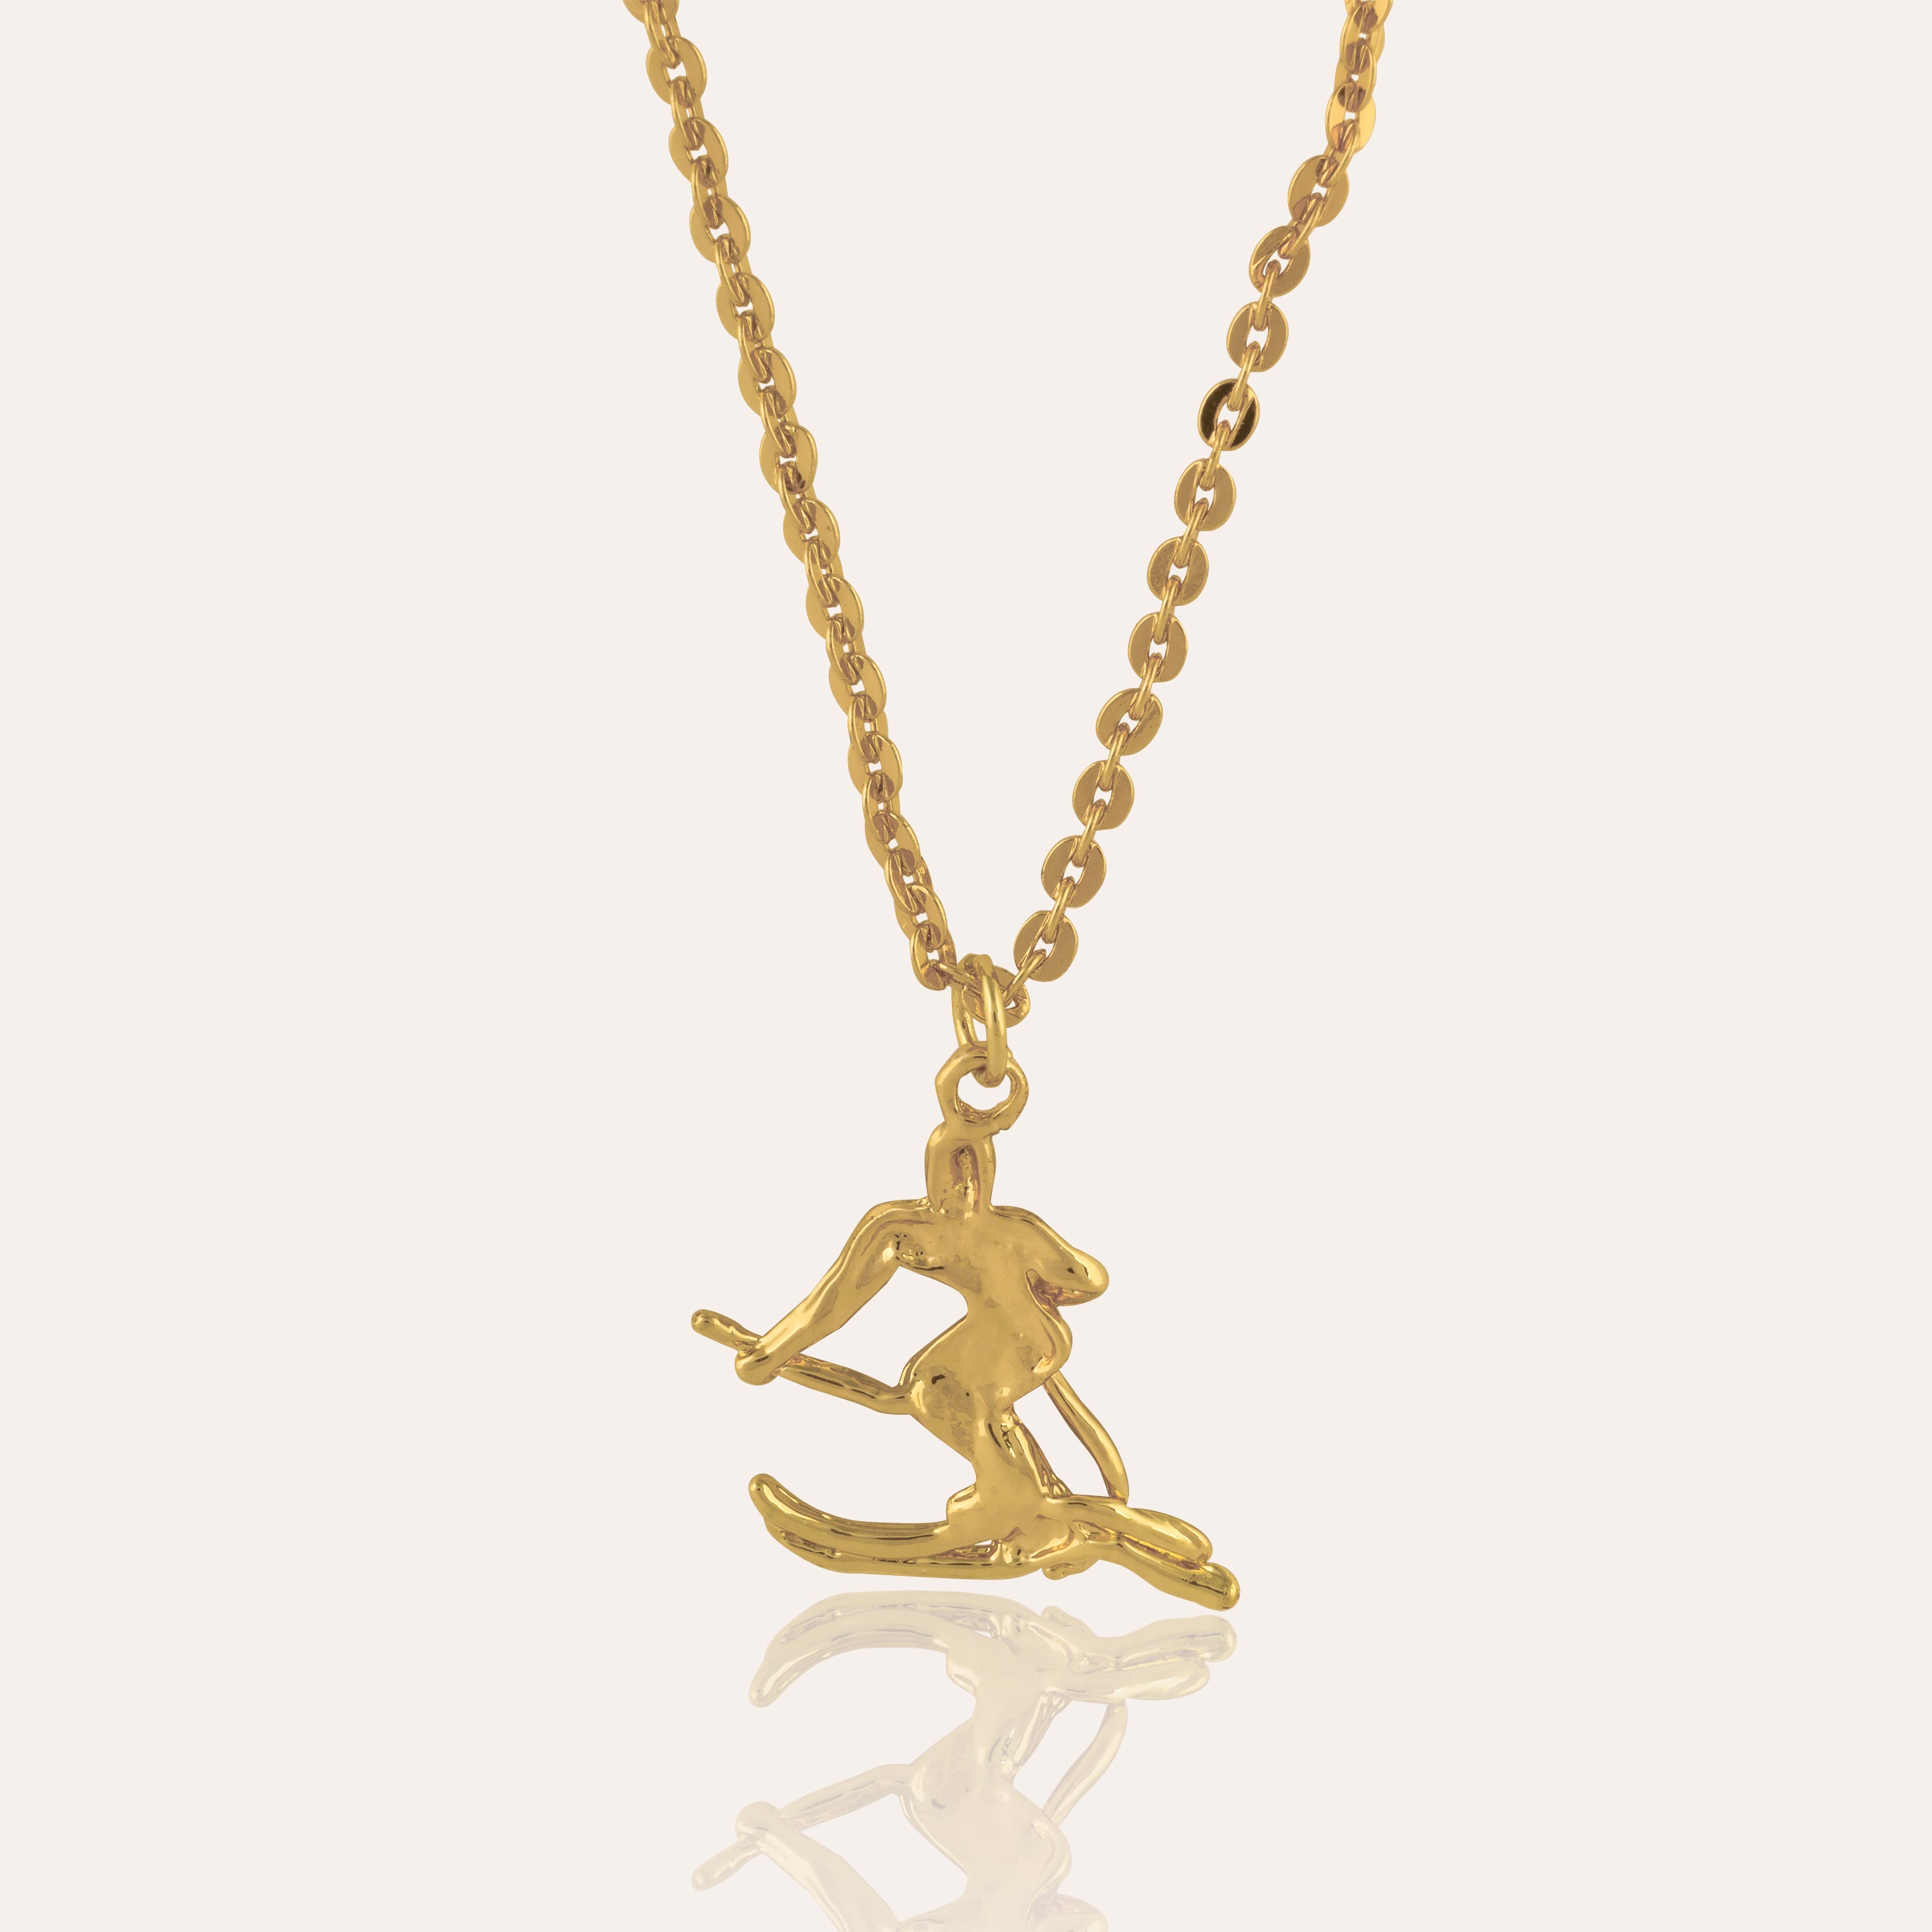 TFC Surfer Gold Plated Pendant Necklace-Enhance your elegance with our collection of gold-plated necklaces for women. Choose from stunning pendant necklaces, chic choker necklaces, and trendy layered necklaces. Our sleek and dainty designs are both affordable and anti-tarnish, ensuring lasting beauty. Enjoy the cheapest fashion jewellery, lightweight and stylish- only at The Fun Company